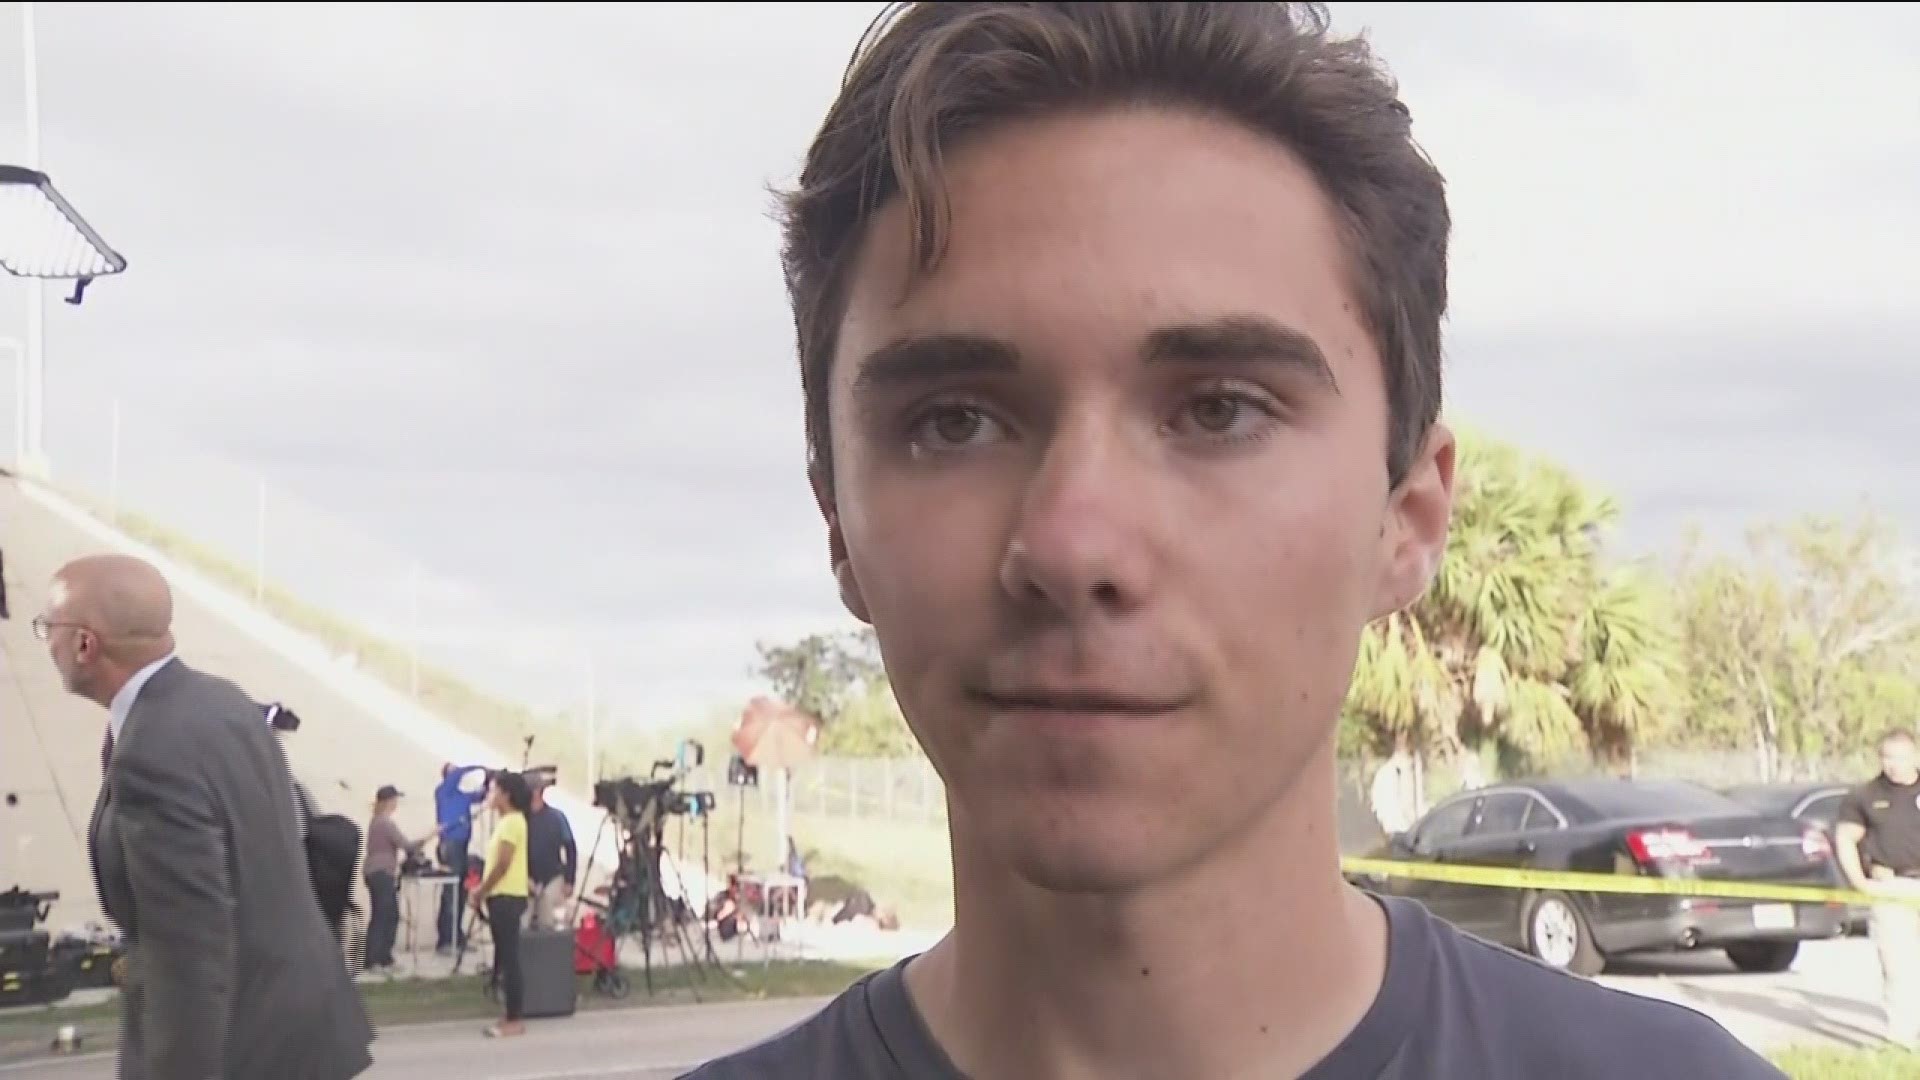 David Hogg, a senior at Marjory Stoneman Douglas High School recorded video of his barricaded classmates during Wednesday's massacre in Parkland, Fla. One day later, he said, "this is completely unacceptable." (Feb. 15)